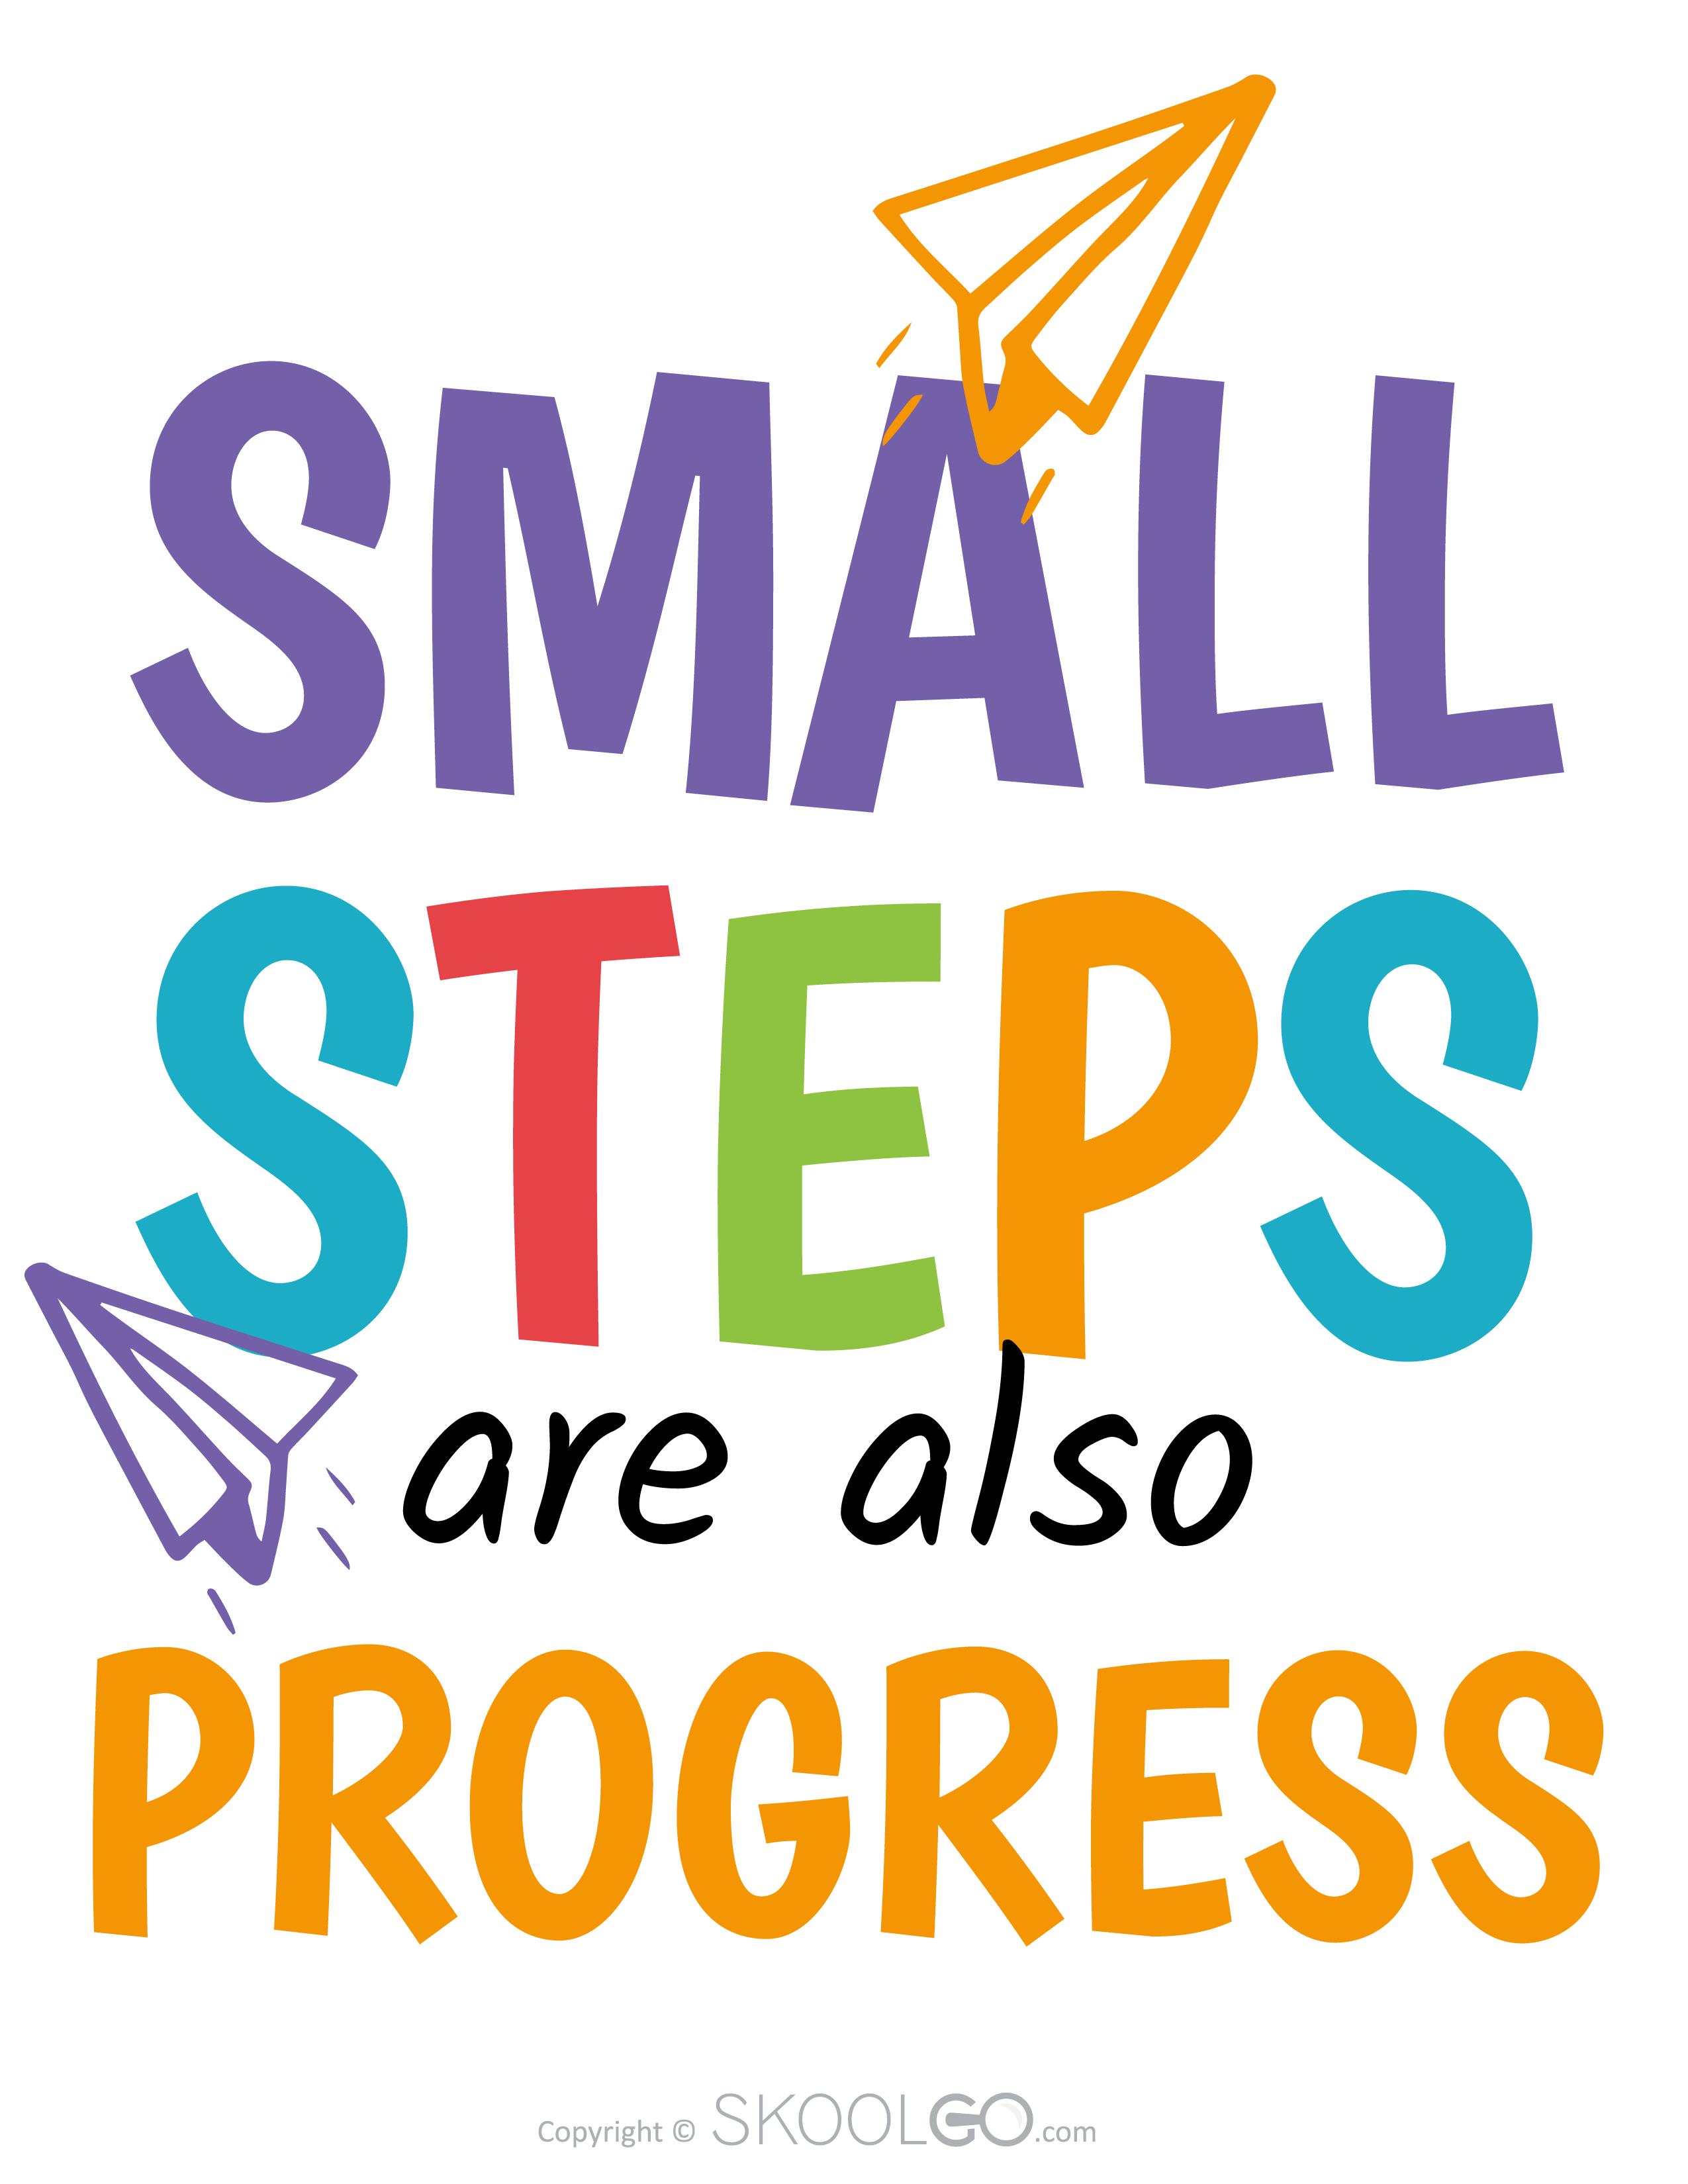 Small Steps Are Also Progress - Free Classroom Poster